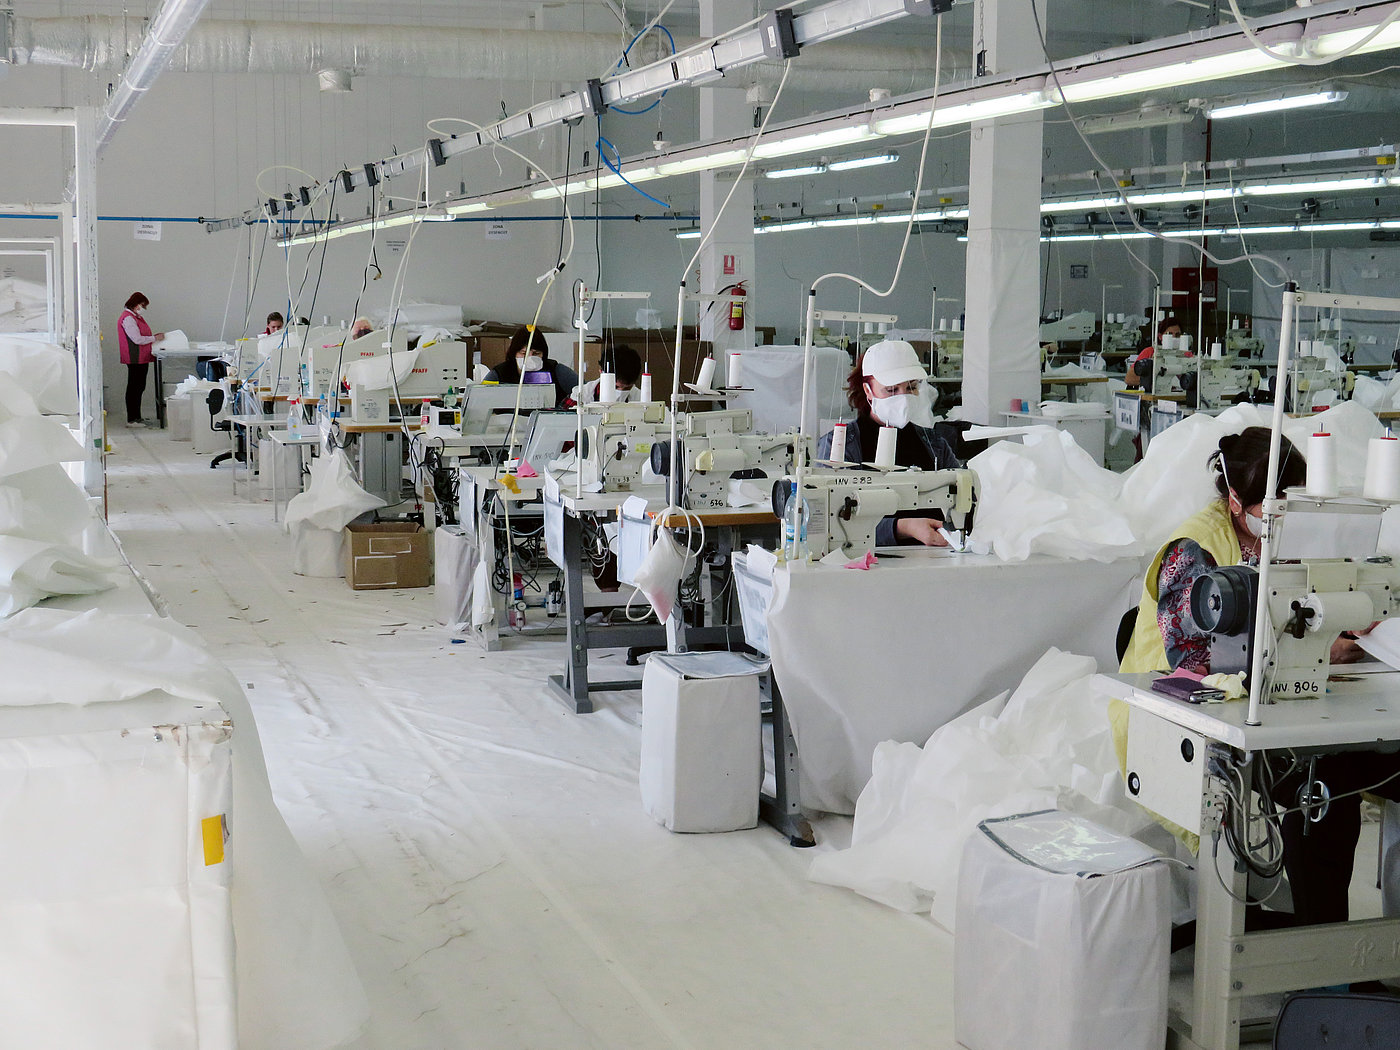 Photo: People sit at industrial sewing machines in a big hall. They are sewing white fabric with white thread.